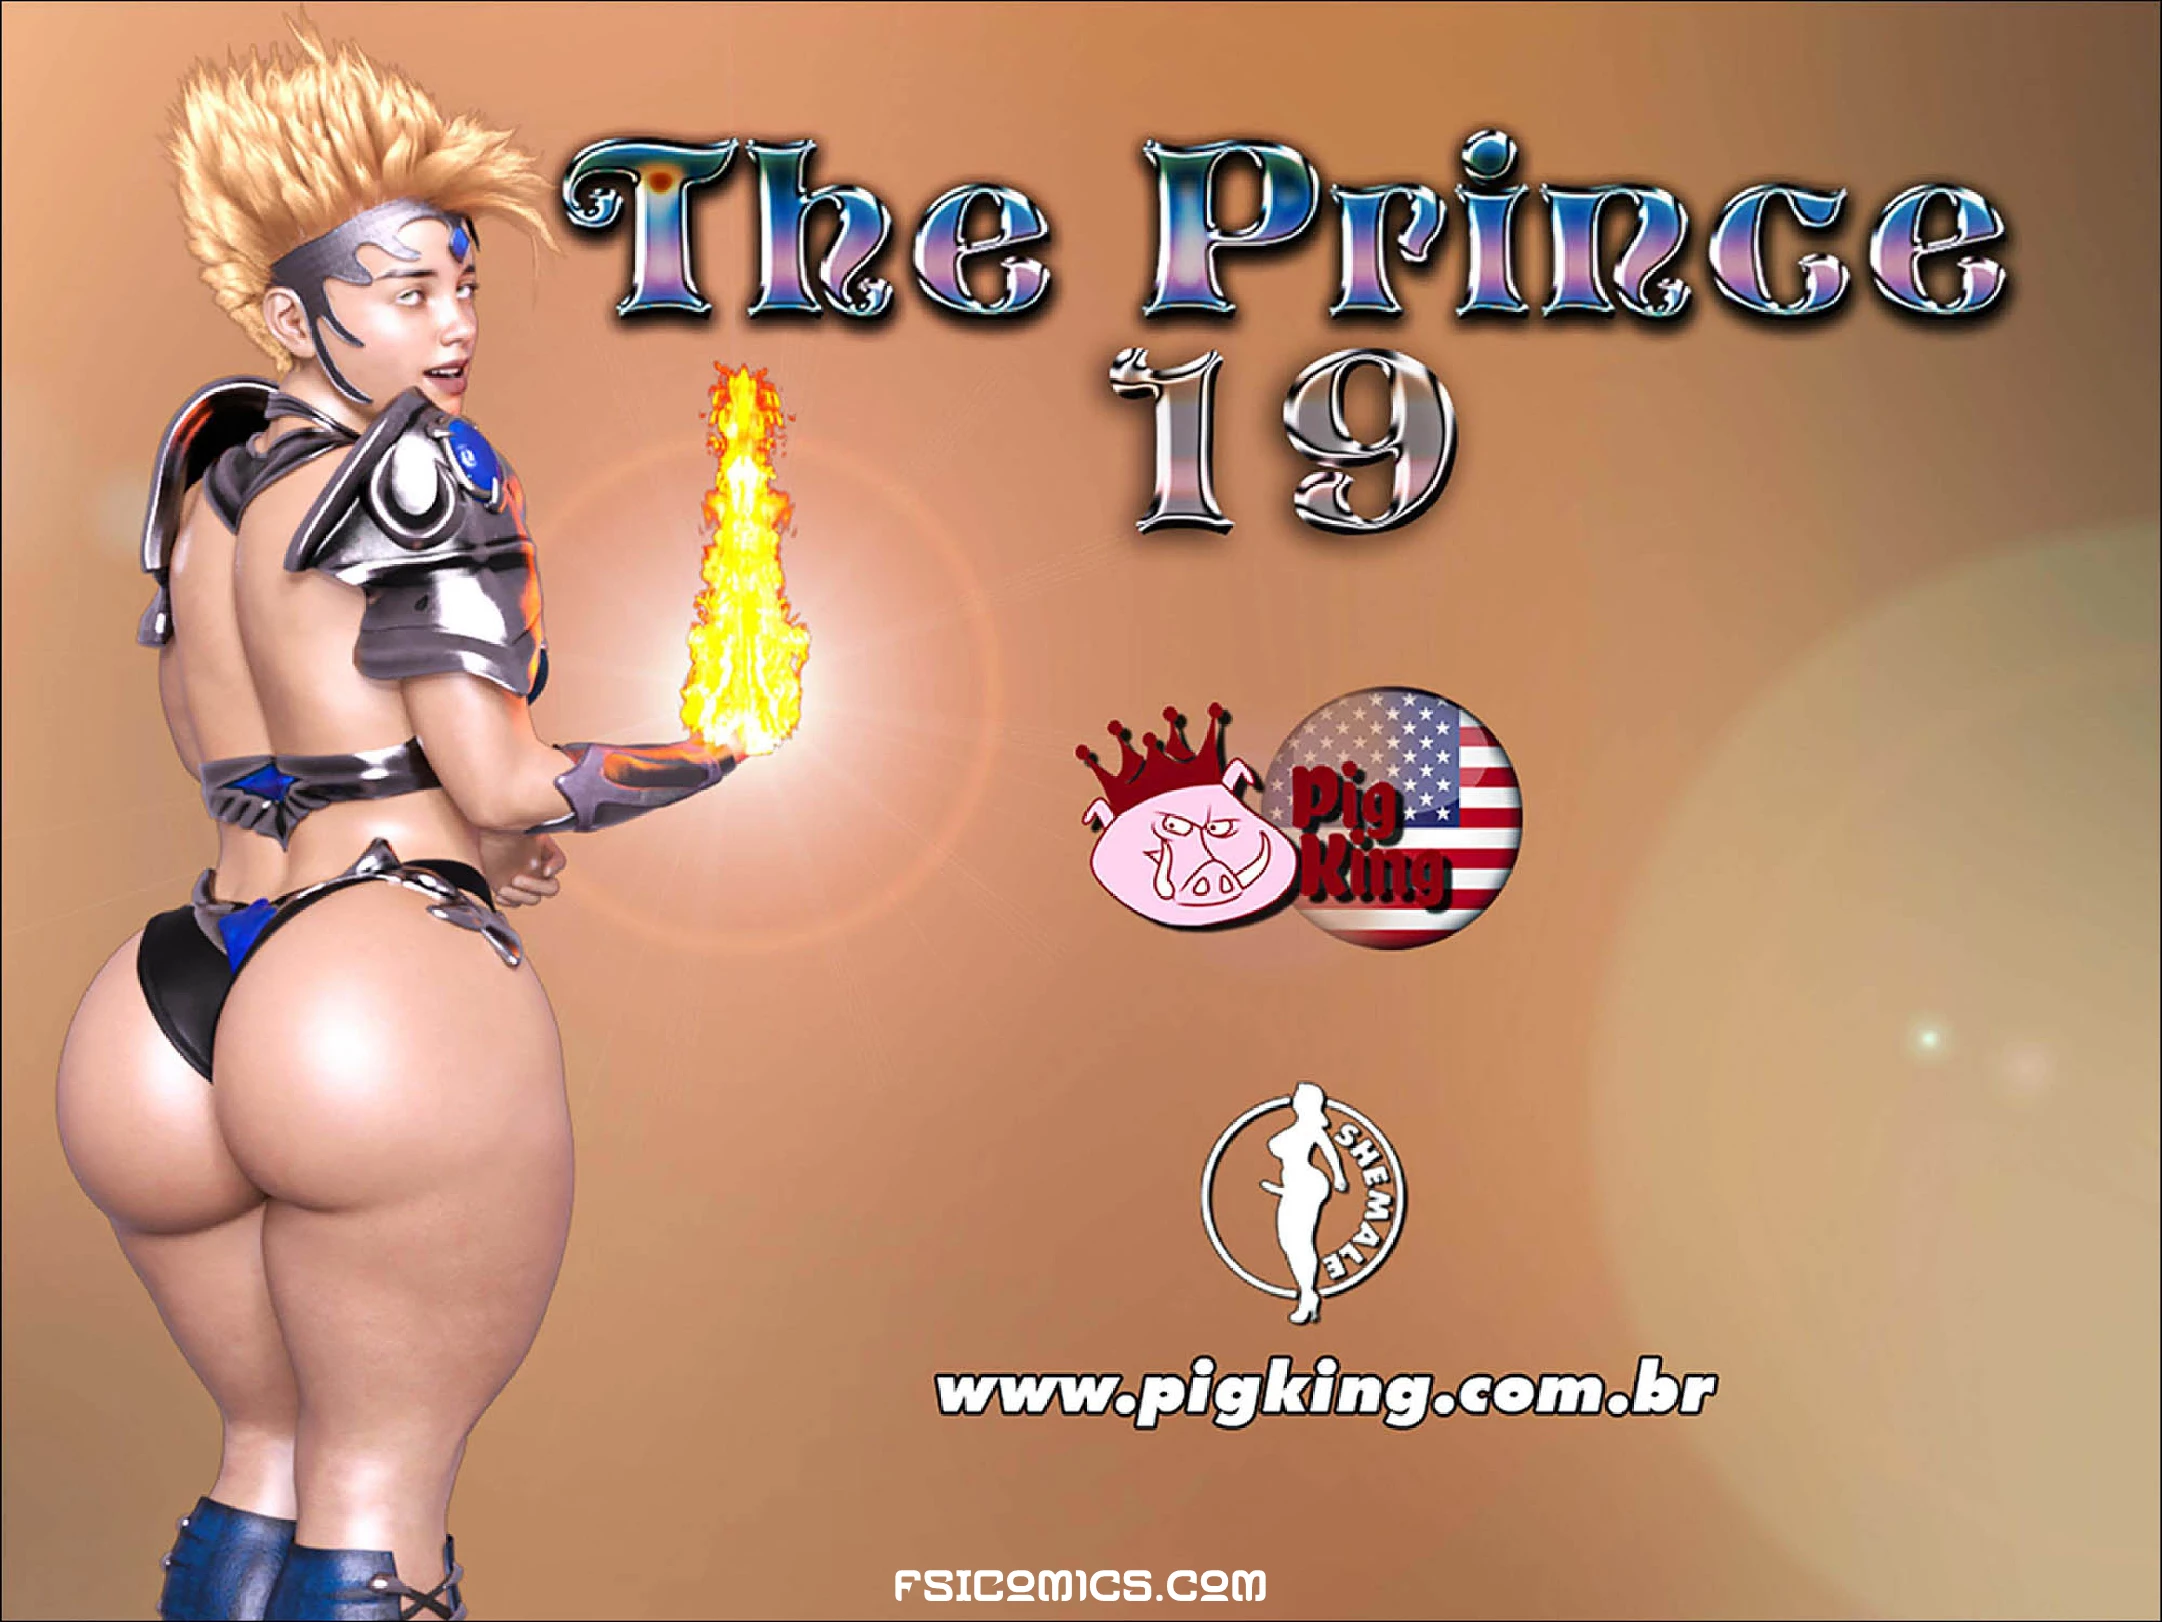 The Prince Chapter 19 – PigKing - 144 - FSIComics